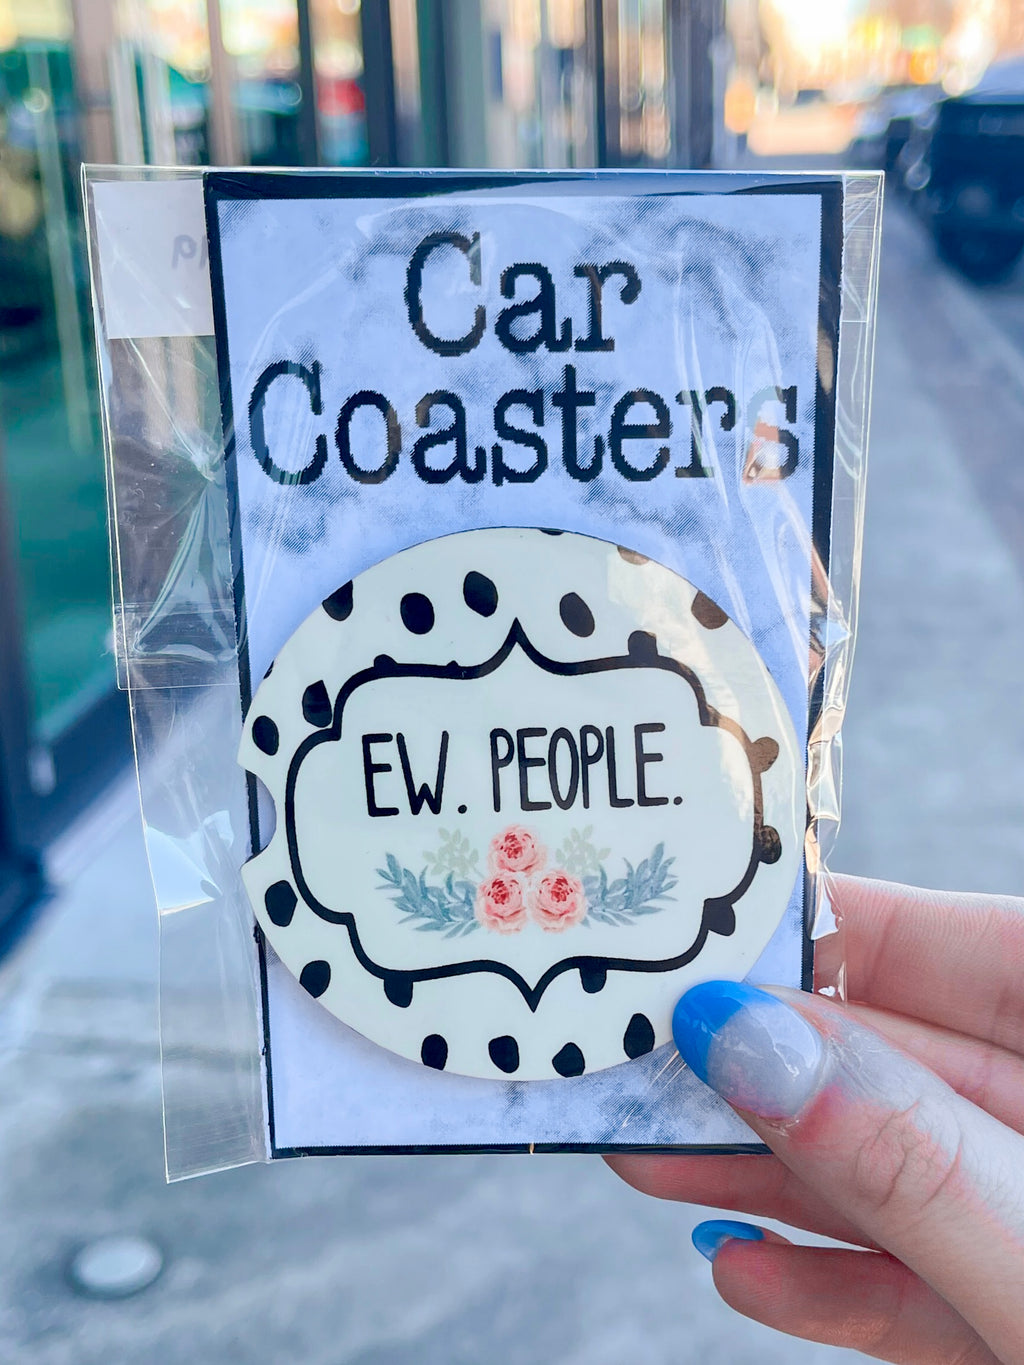 These car coaster make the perfect gift for anyone! Everyone loves a cute coaster for their car!   * 2 coasters come in one pack* 